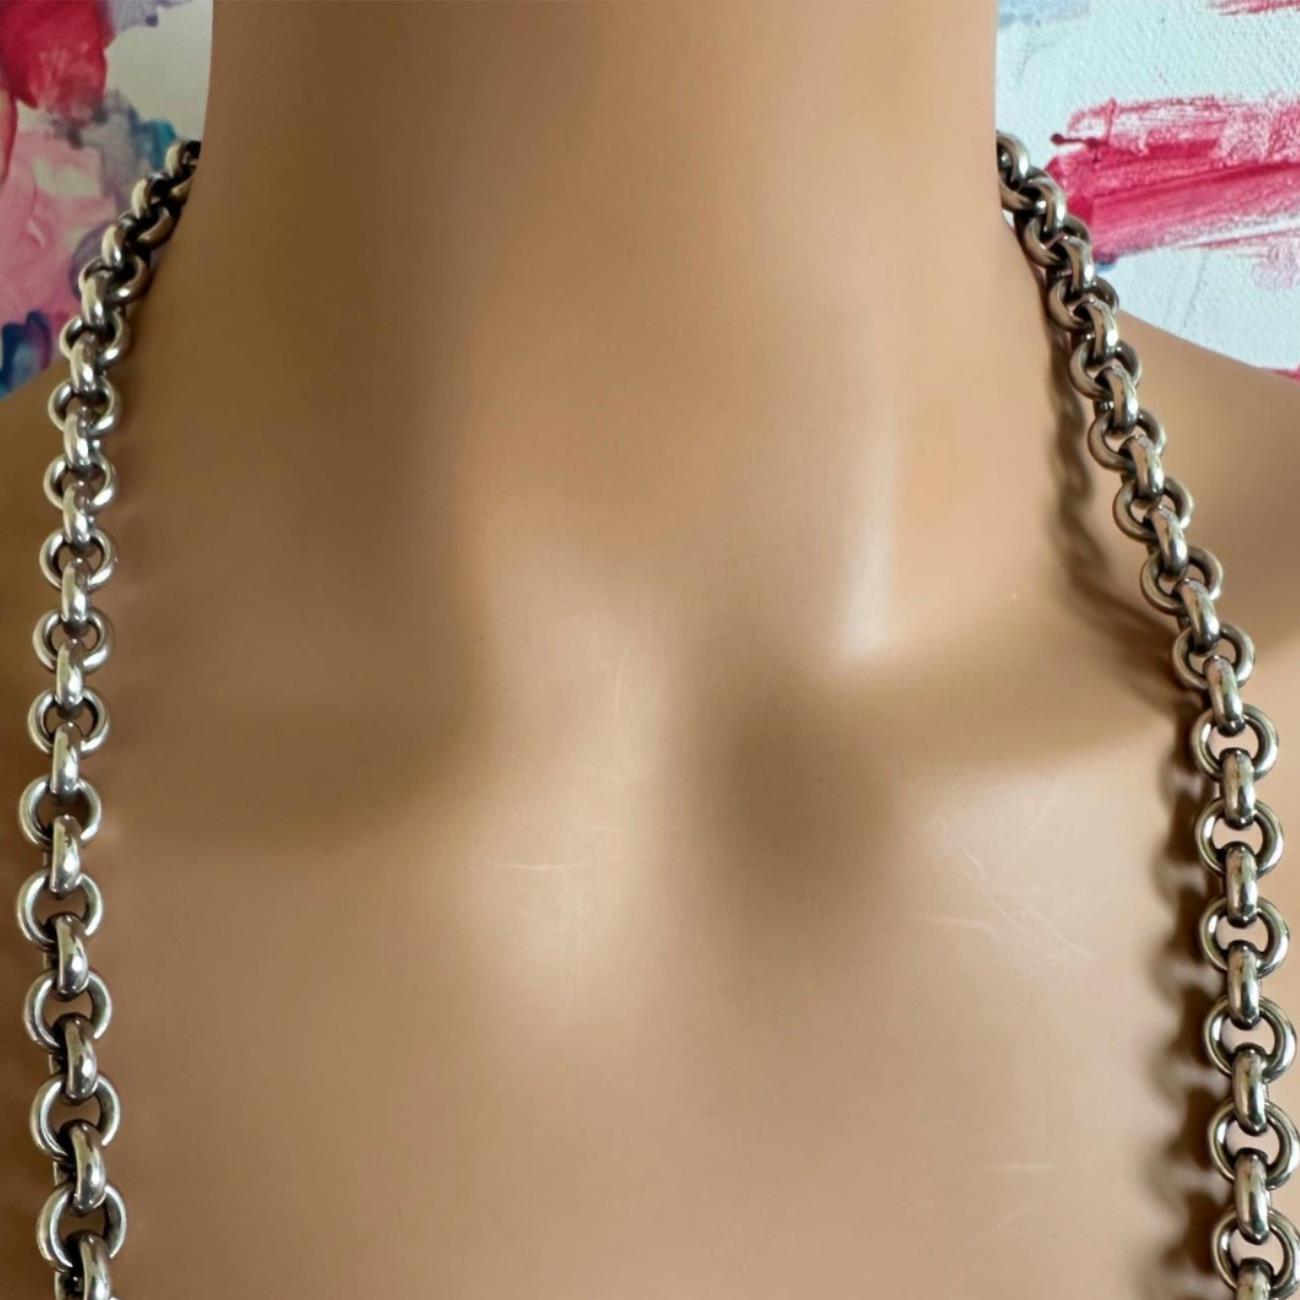 Tiffany & Co Silver Necklace 4 Pendant Charm 21 Inch Bead Chain Longer Gift